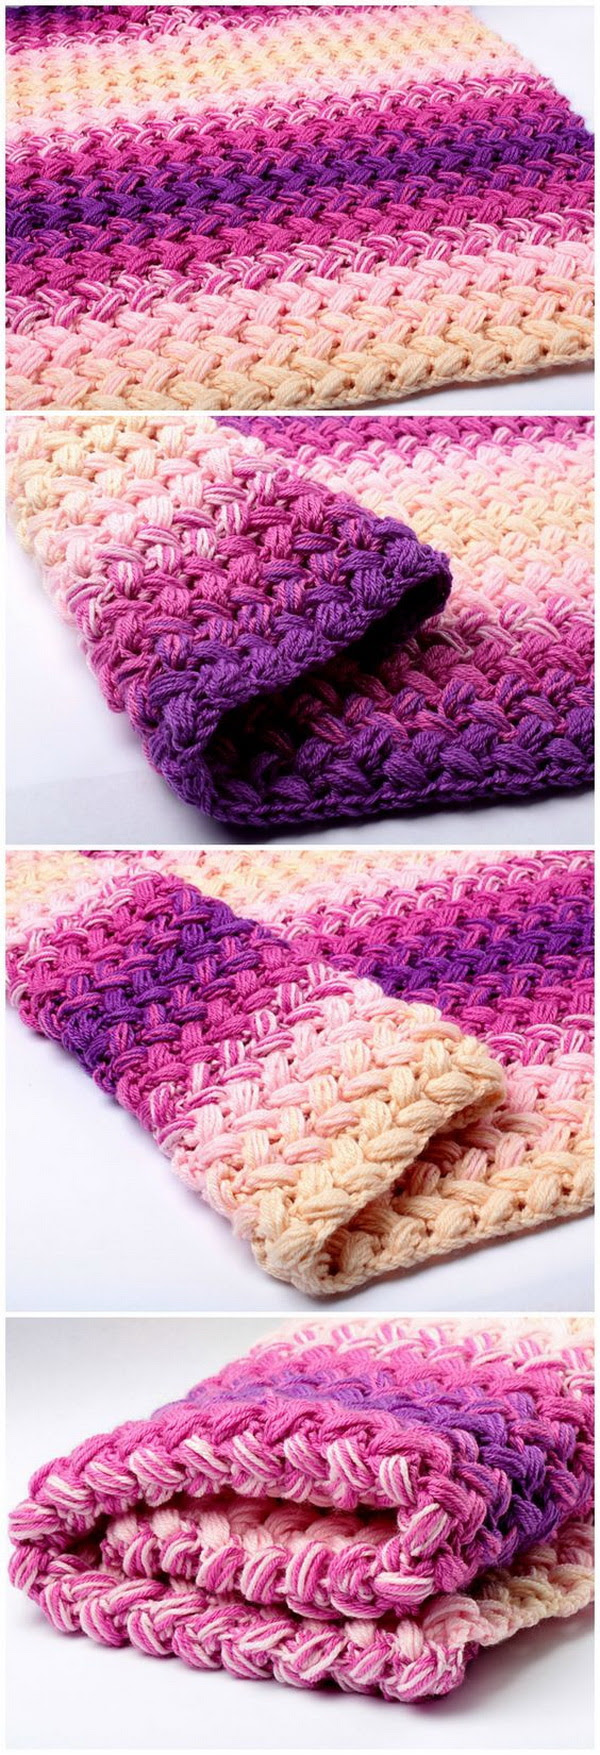 How To Crochet A Blanket For Beginners How To Wiki 89